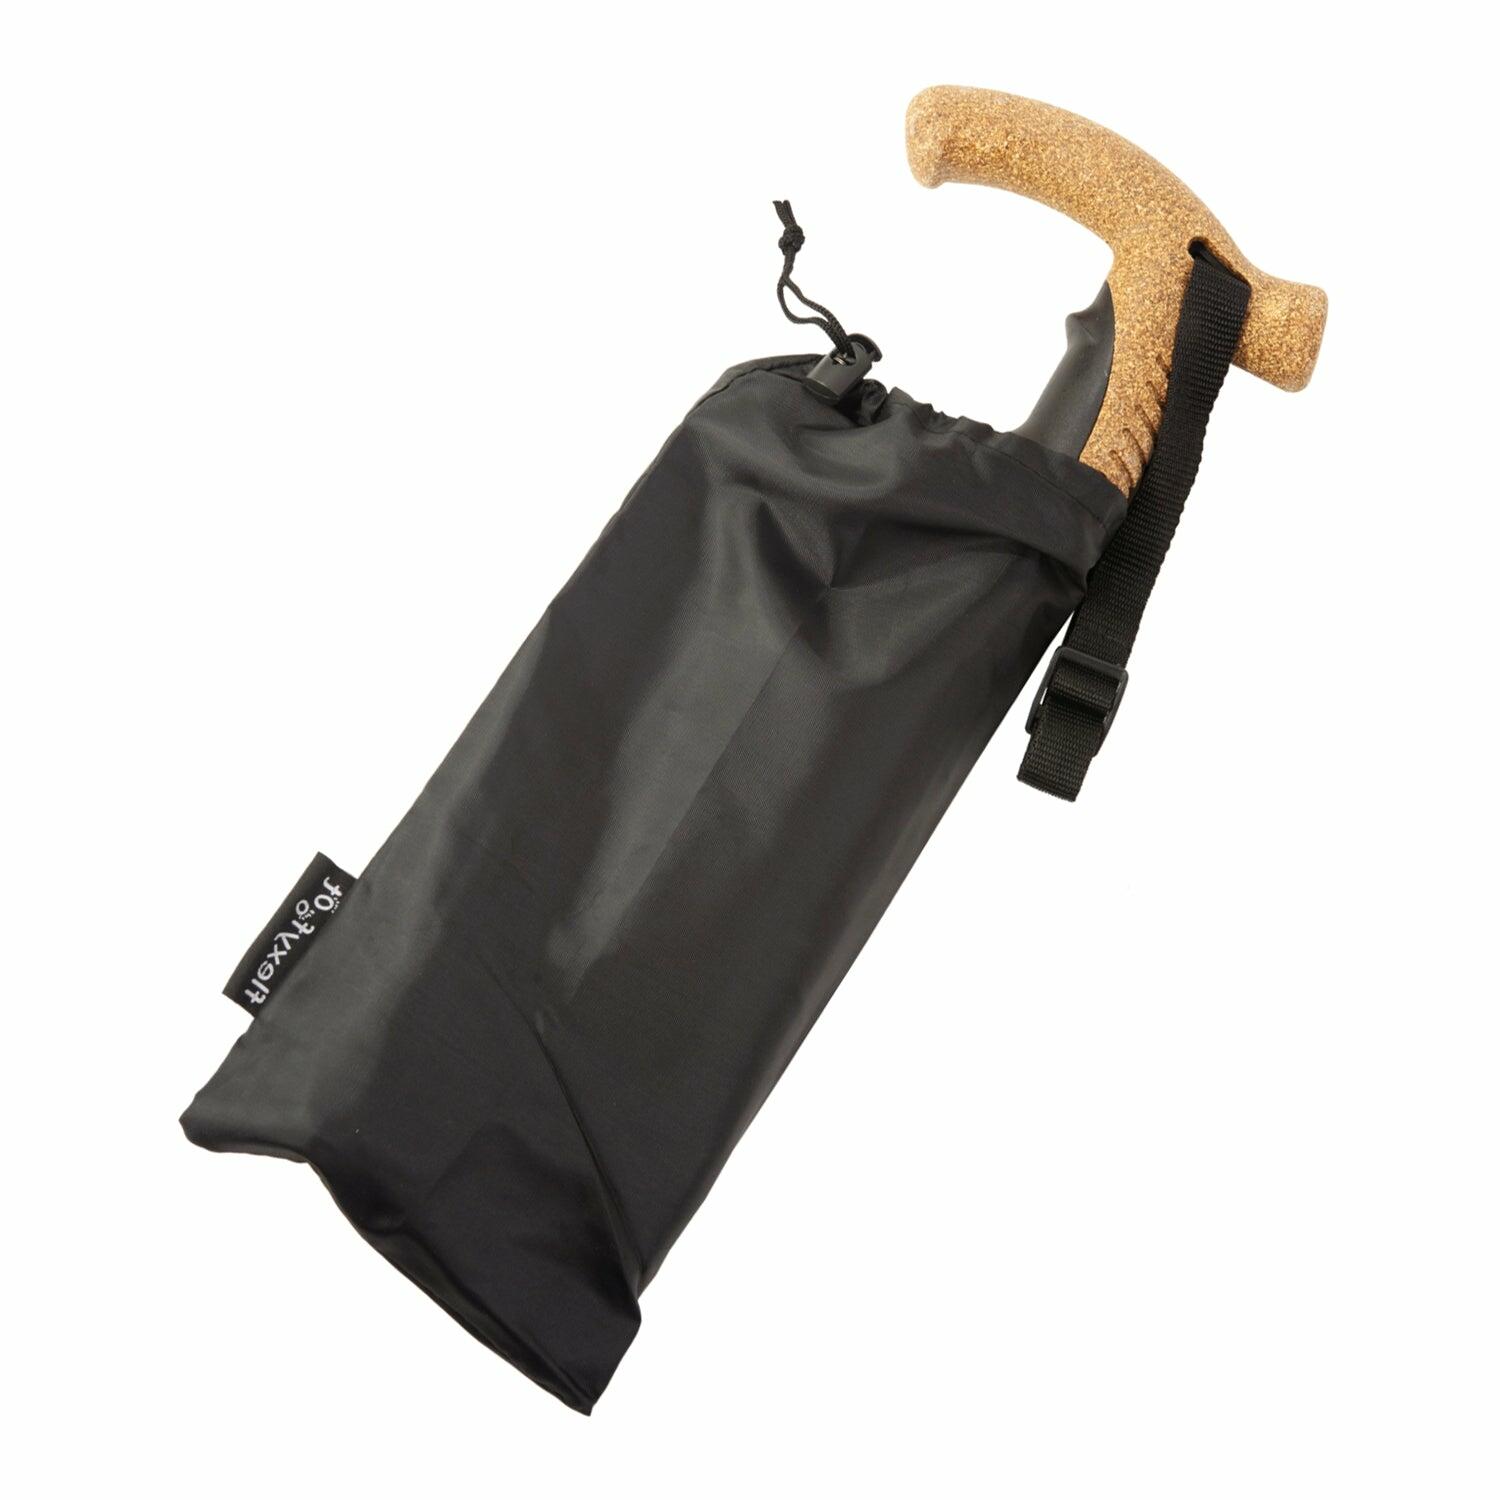 A single orange Flexyfoot Premium Cork Handle Folding Walking Stick in the supplied carry bag